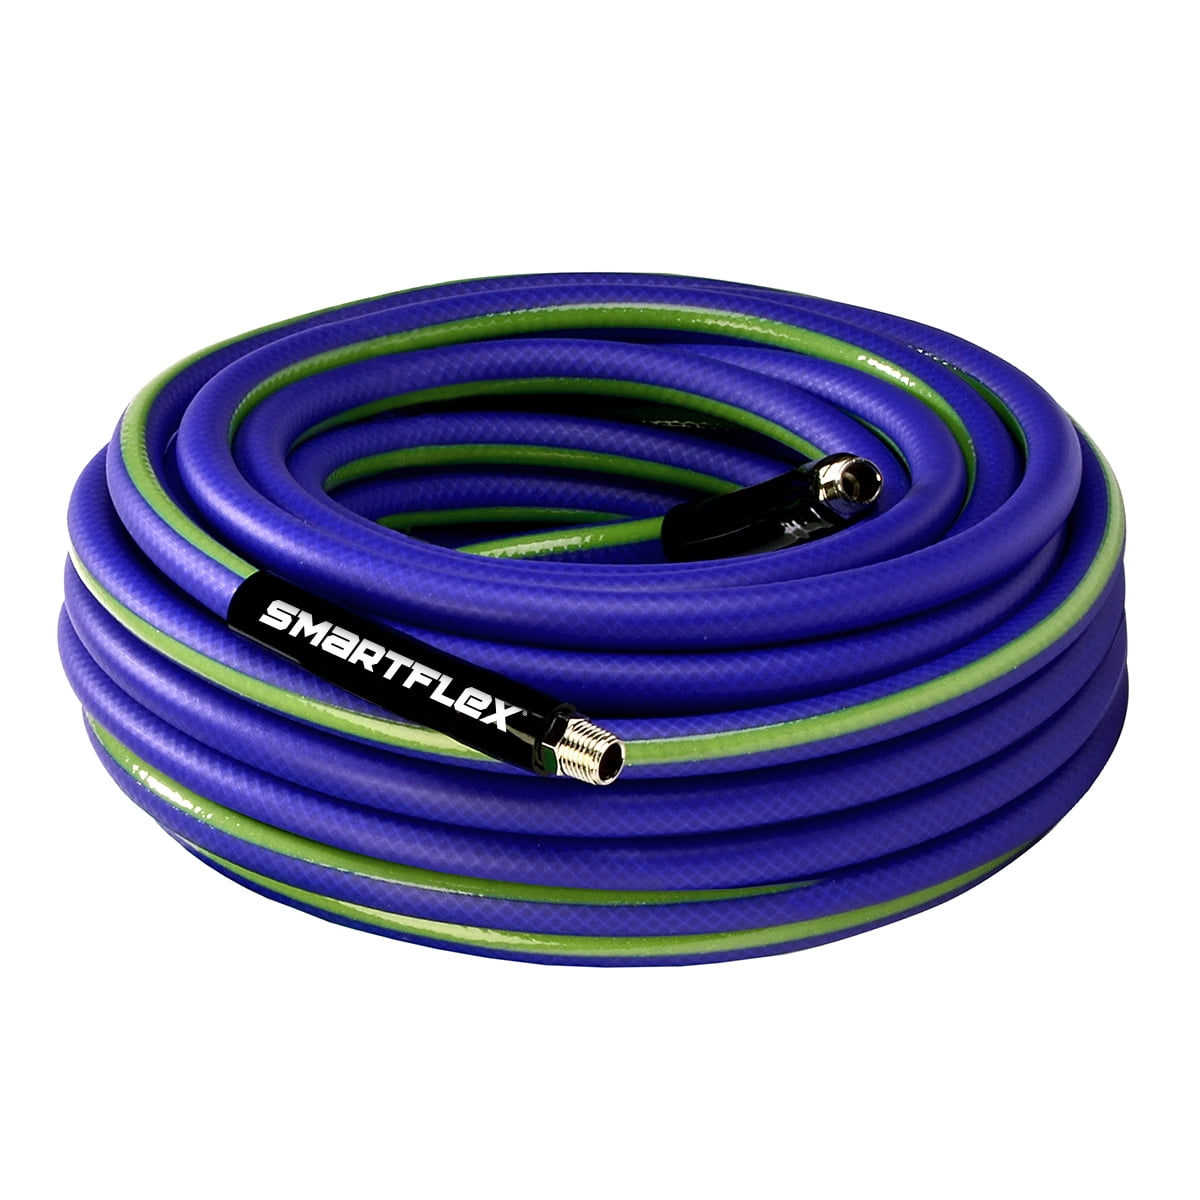 AirSpade HT113 Std Air Compressor Hose 50' x 1 with Air-Kind AM11 Couplings